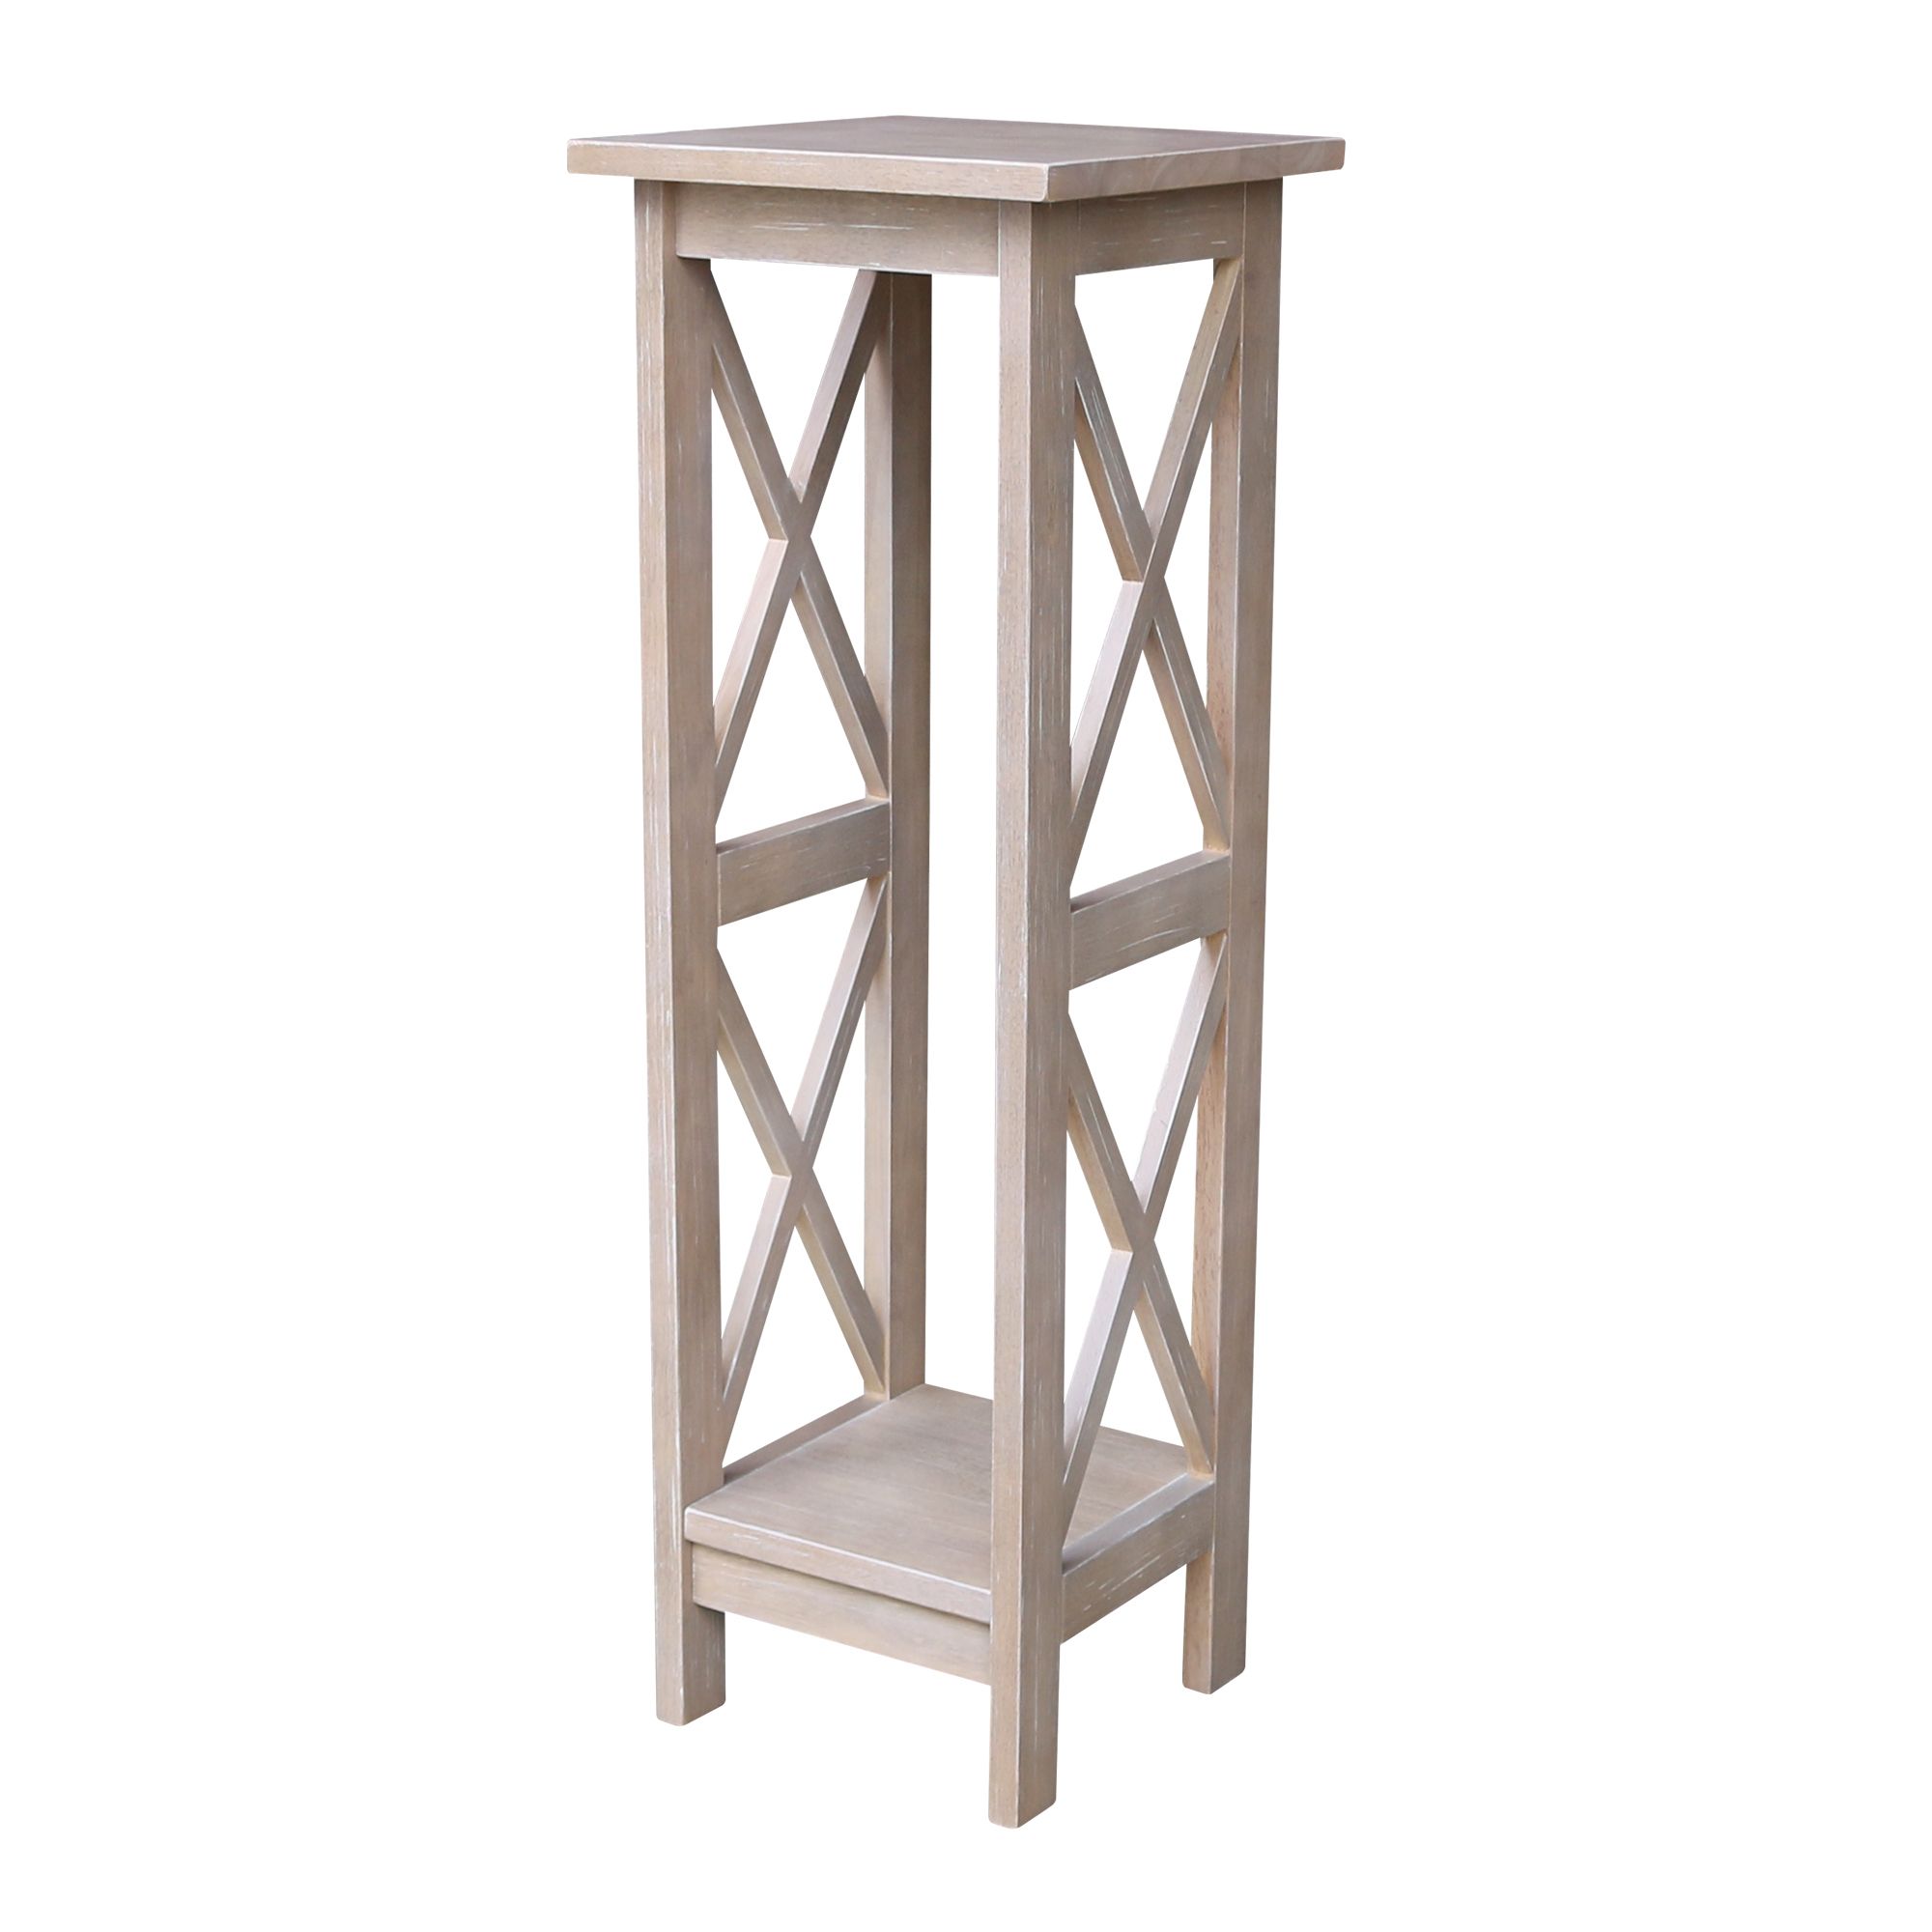 Solid Wood X Sided Plant Stand In Washed Gray Taupe – Walmart With Regard To Weathered Gray Plant Stands (View 12 of 15)